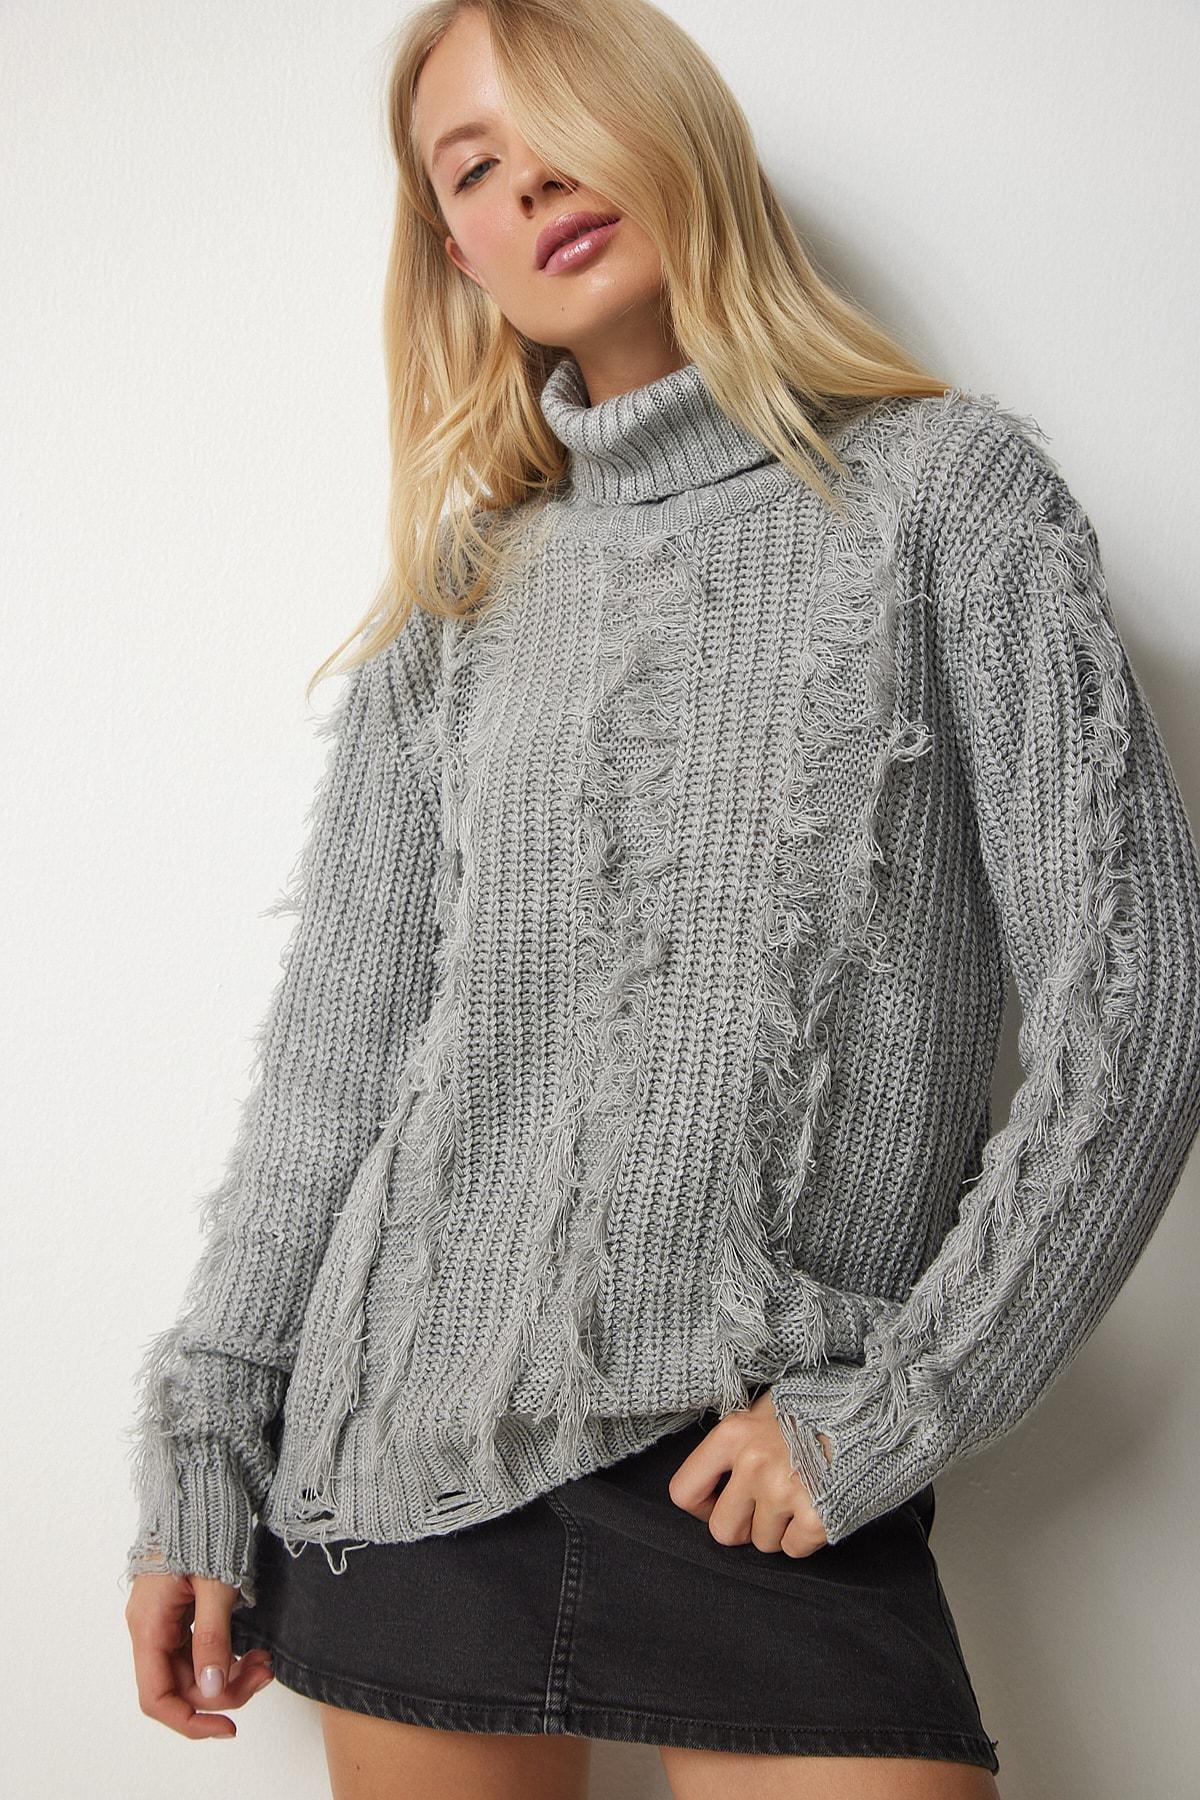 Happiness Istanbul - Gray Knitwear Sweater